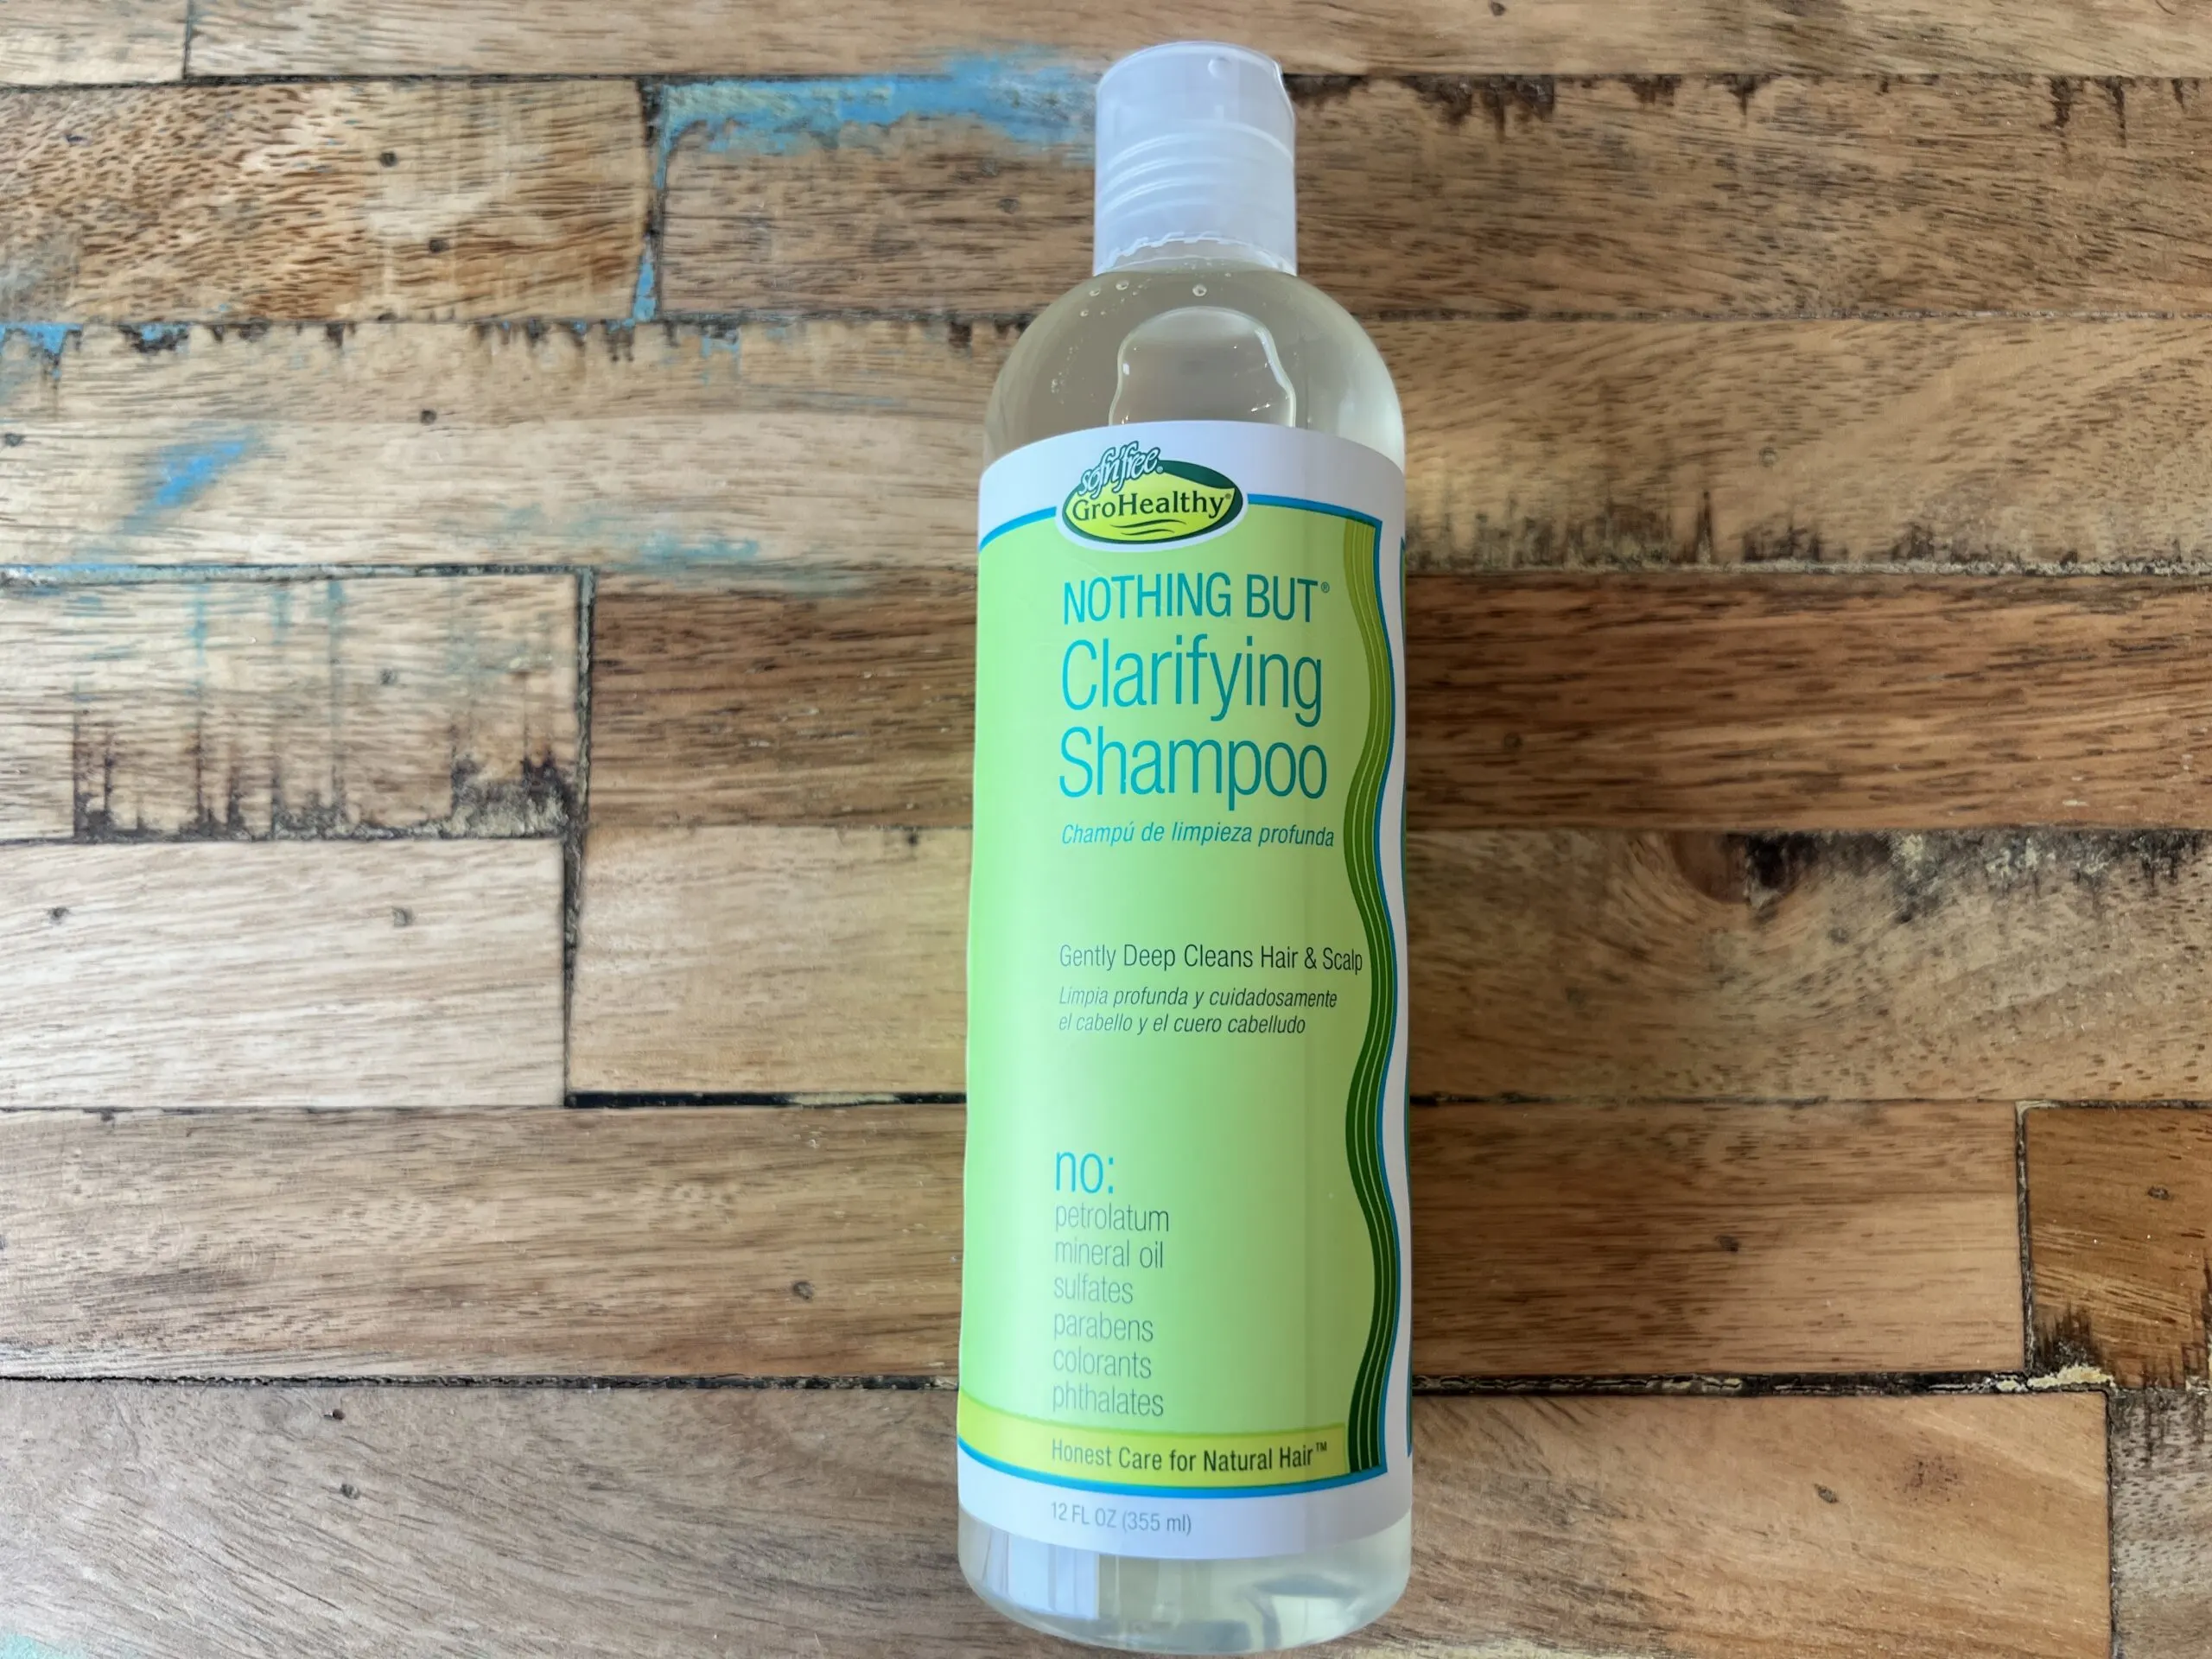 GroHealthy Nothing But Clarifying Shampoo without petrolatum, mineral oil, sulfates, parabens, colorants, and phthalates.